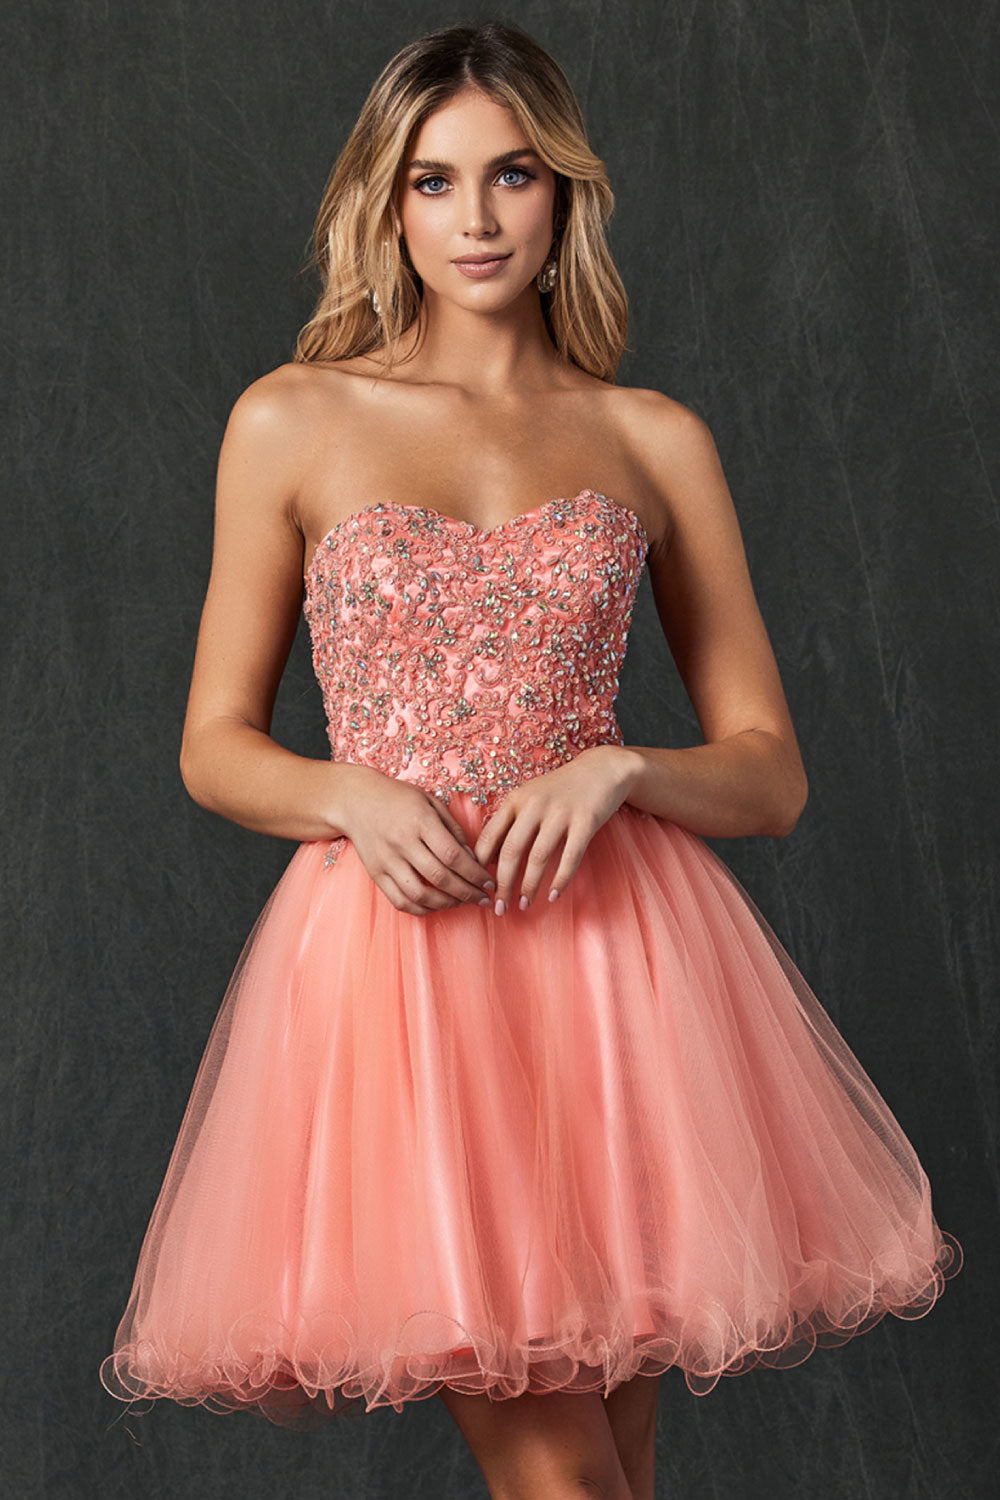 Image of the front of Juliet's Flirty Strapless Prom Dress on a model.